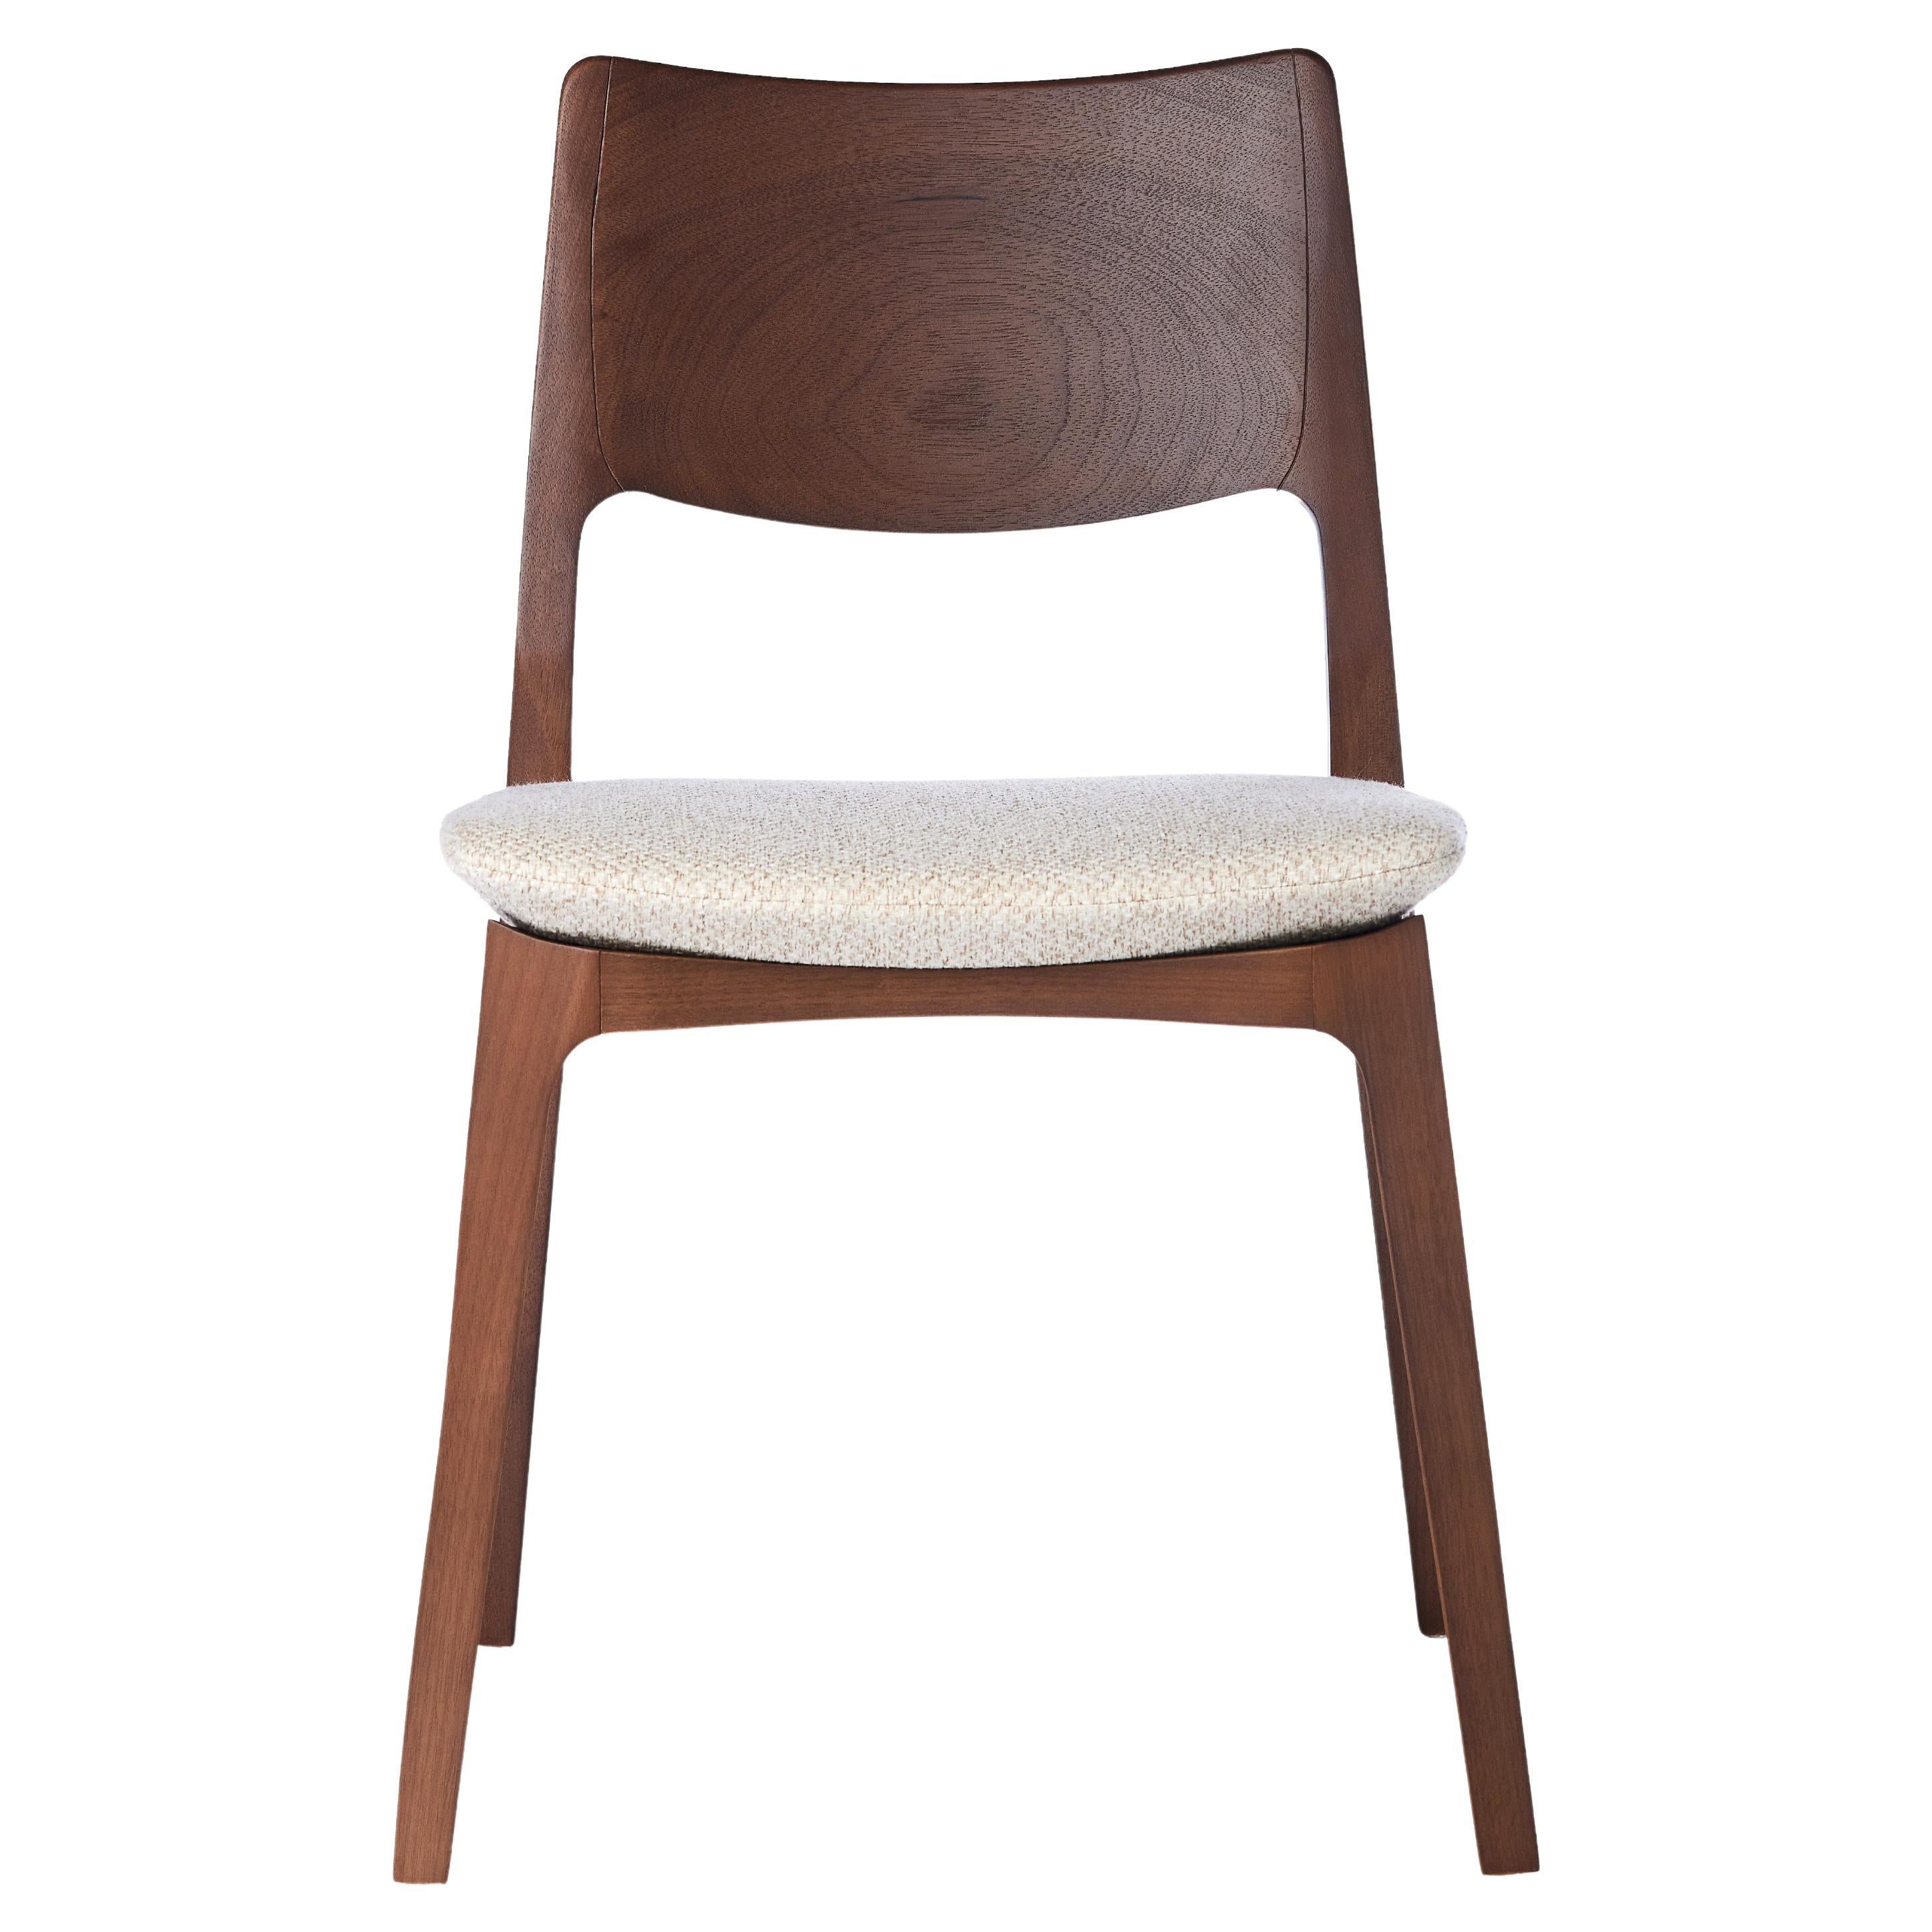 The Moderns Aurora Chair Sculptured in Walnut Finish No Arms, Upholstering Seat